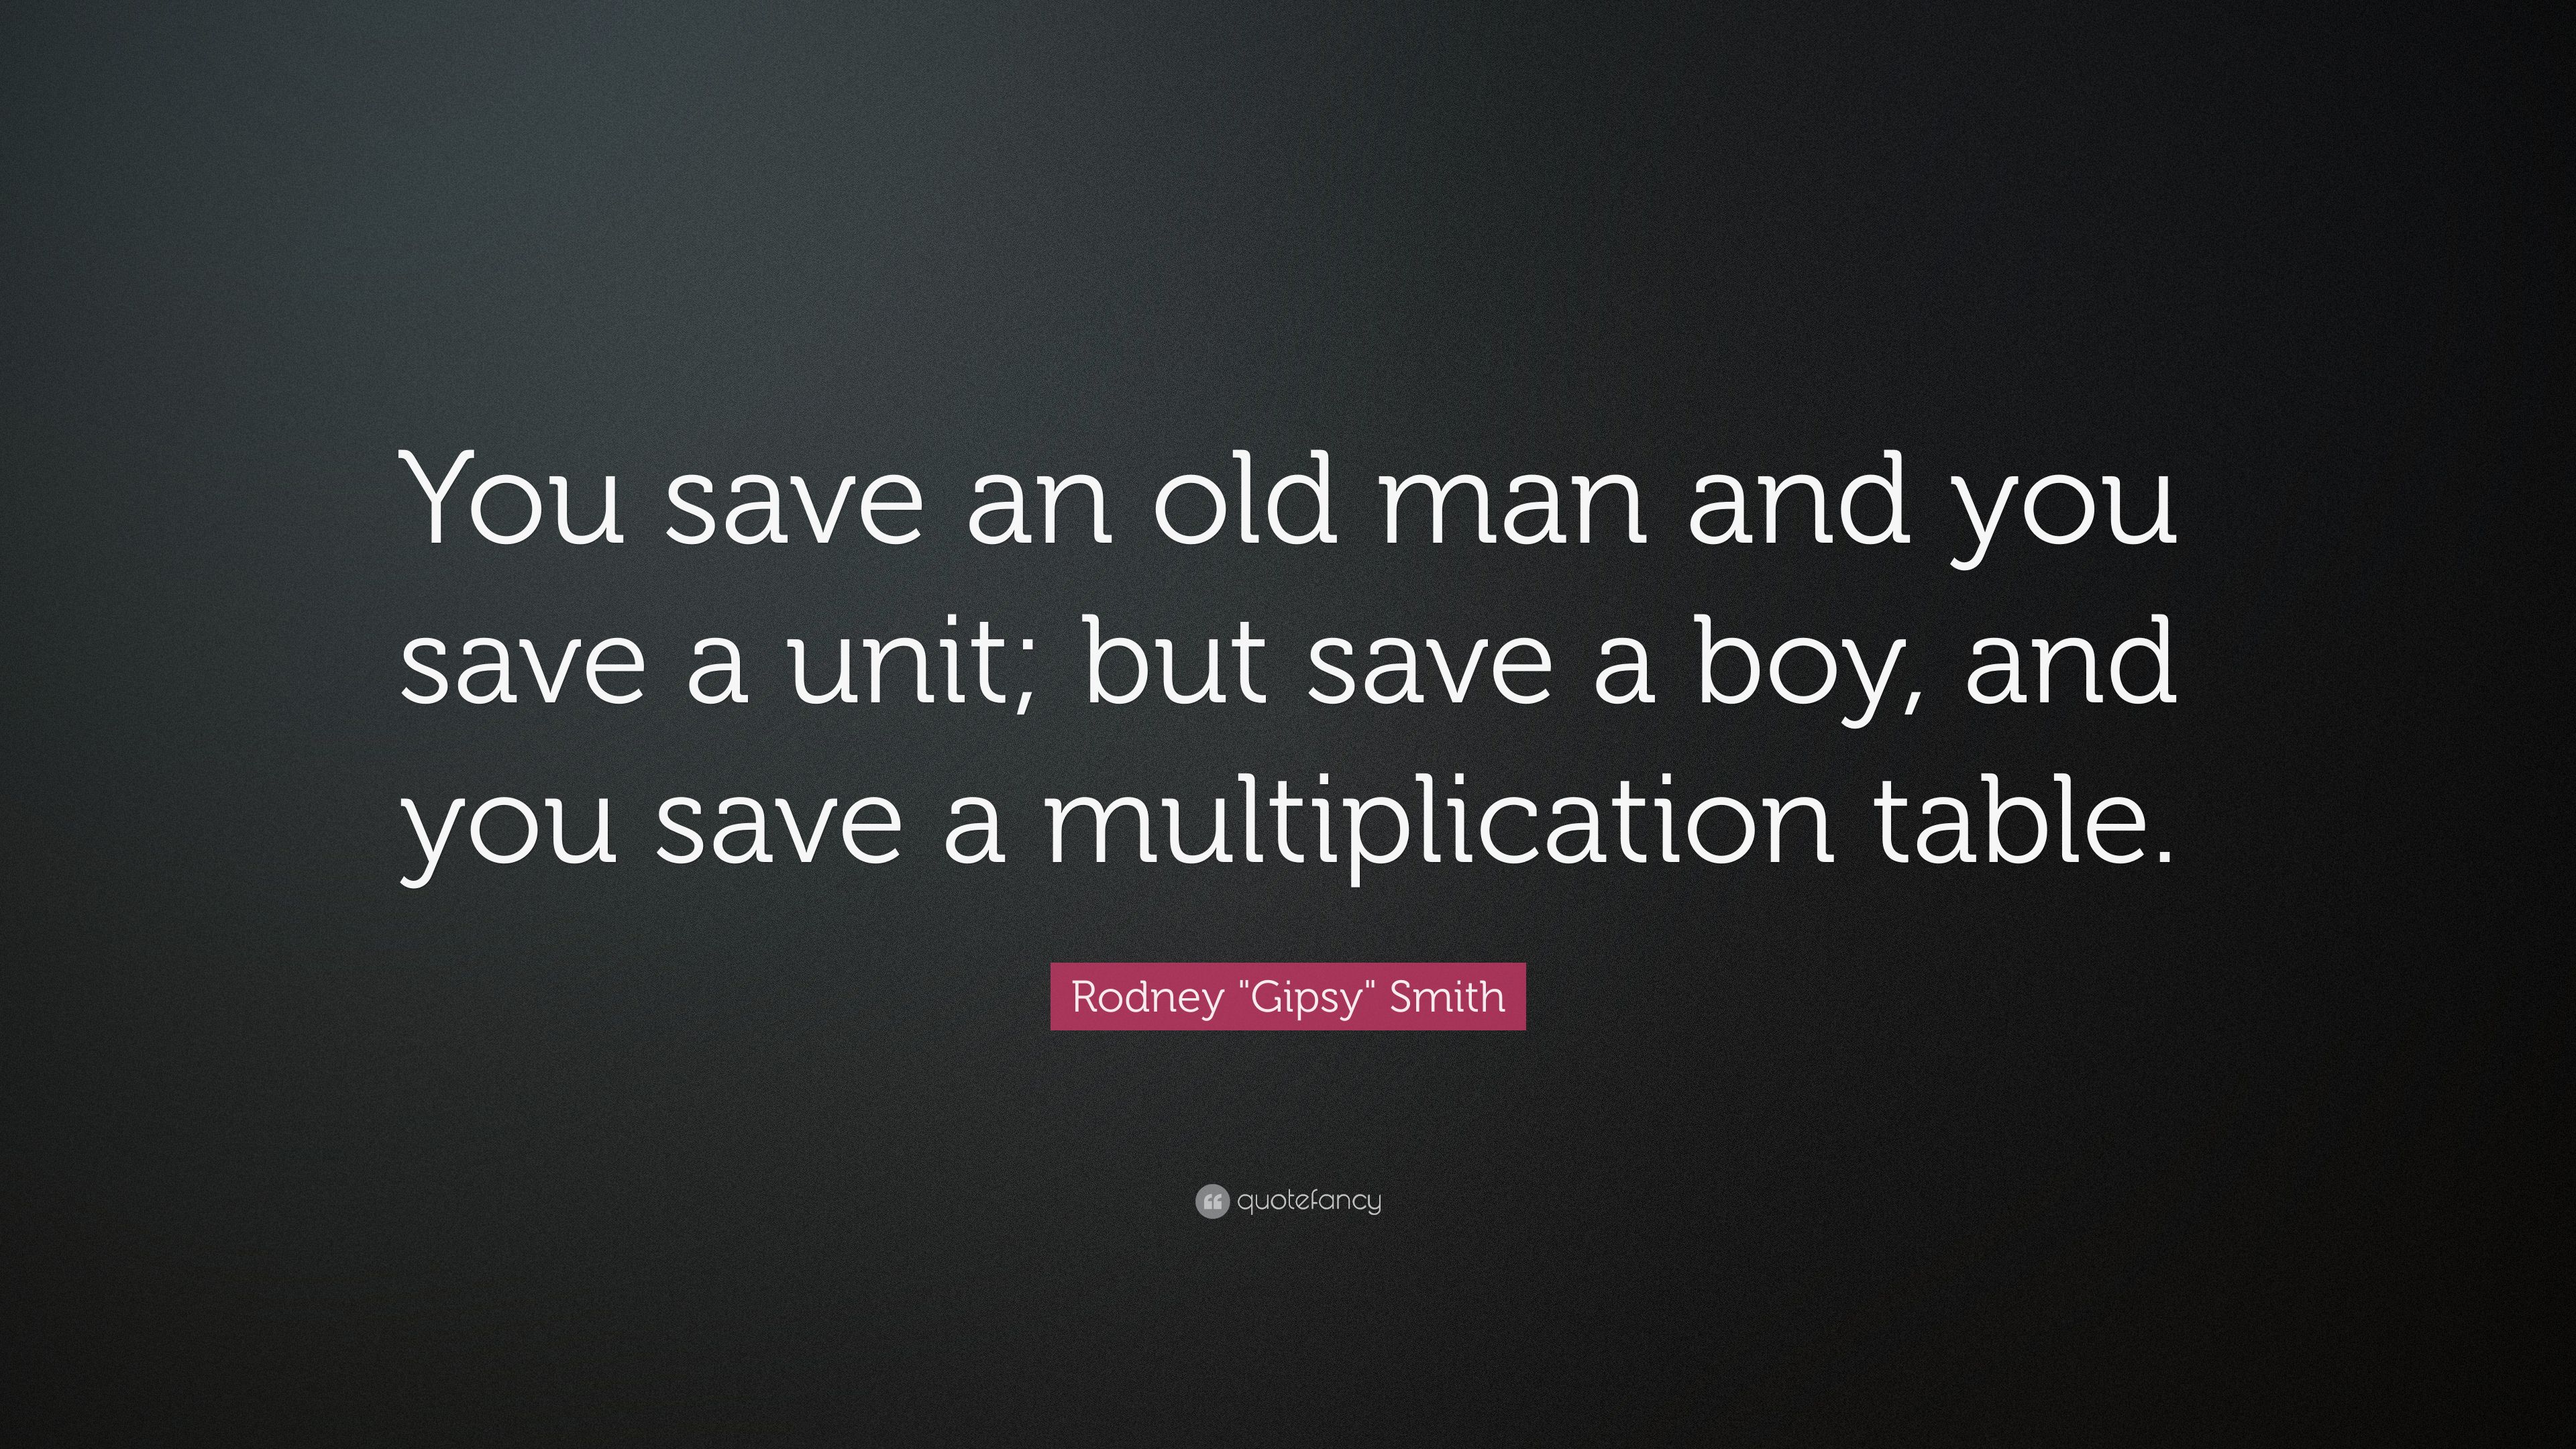 Rodney Gipsy Smith Quote: “You save an old man and you save a unit; but save a boy, and you save a multiplication table.” (7 wallpaper)